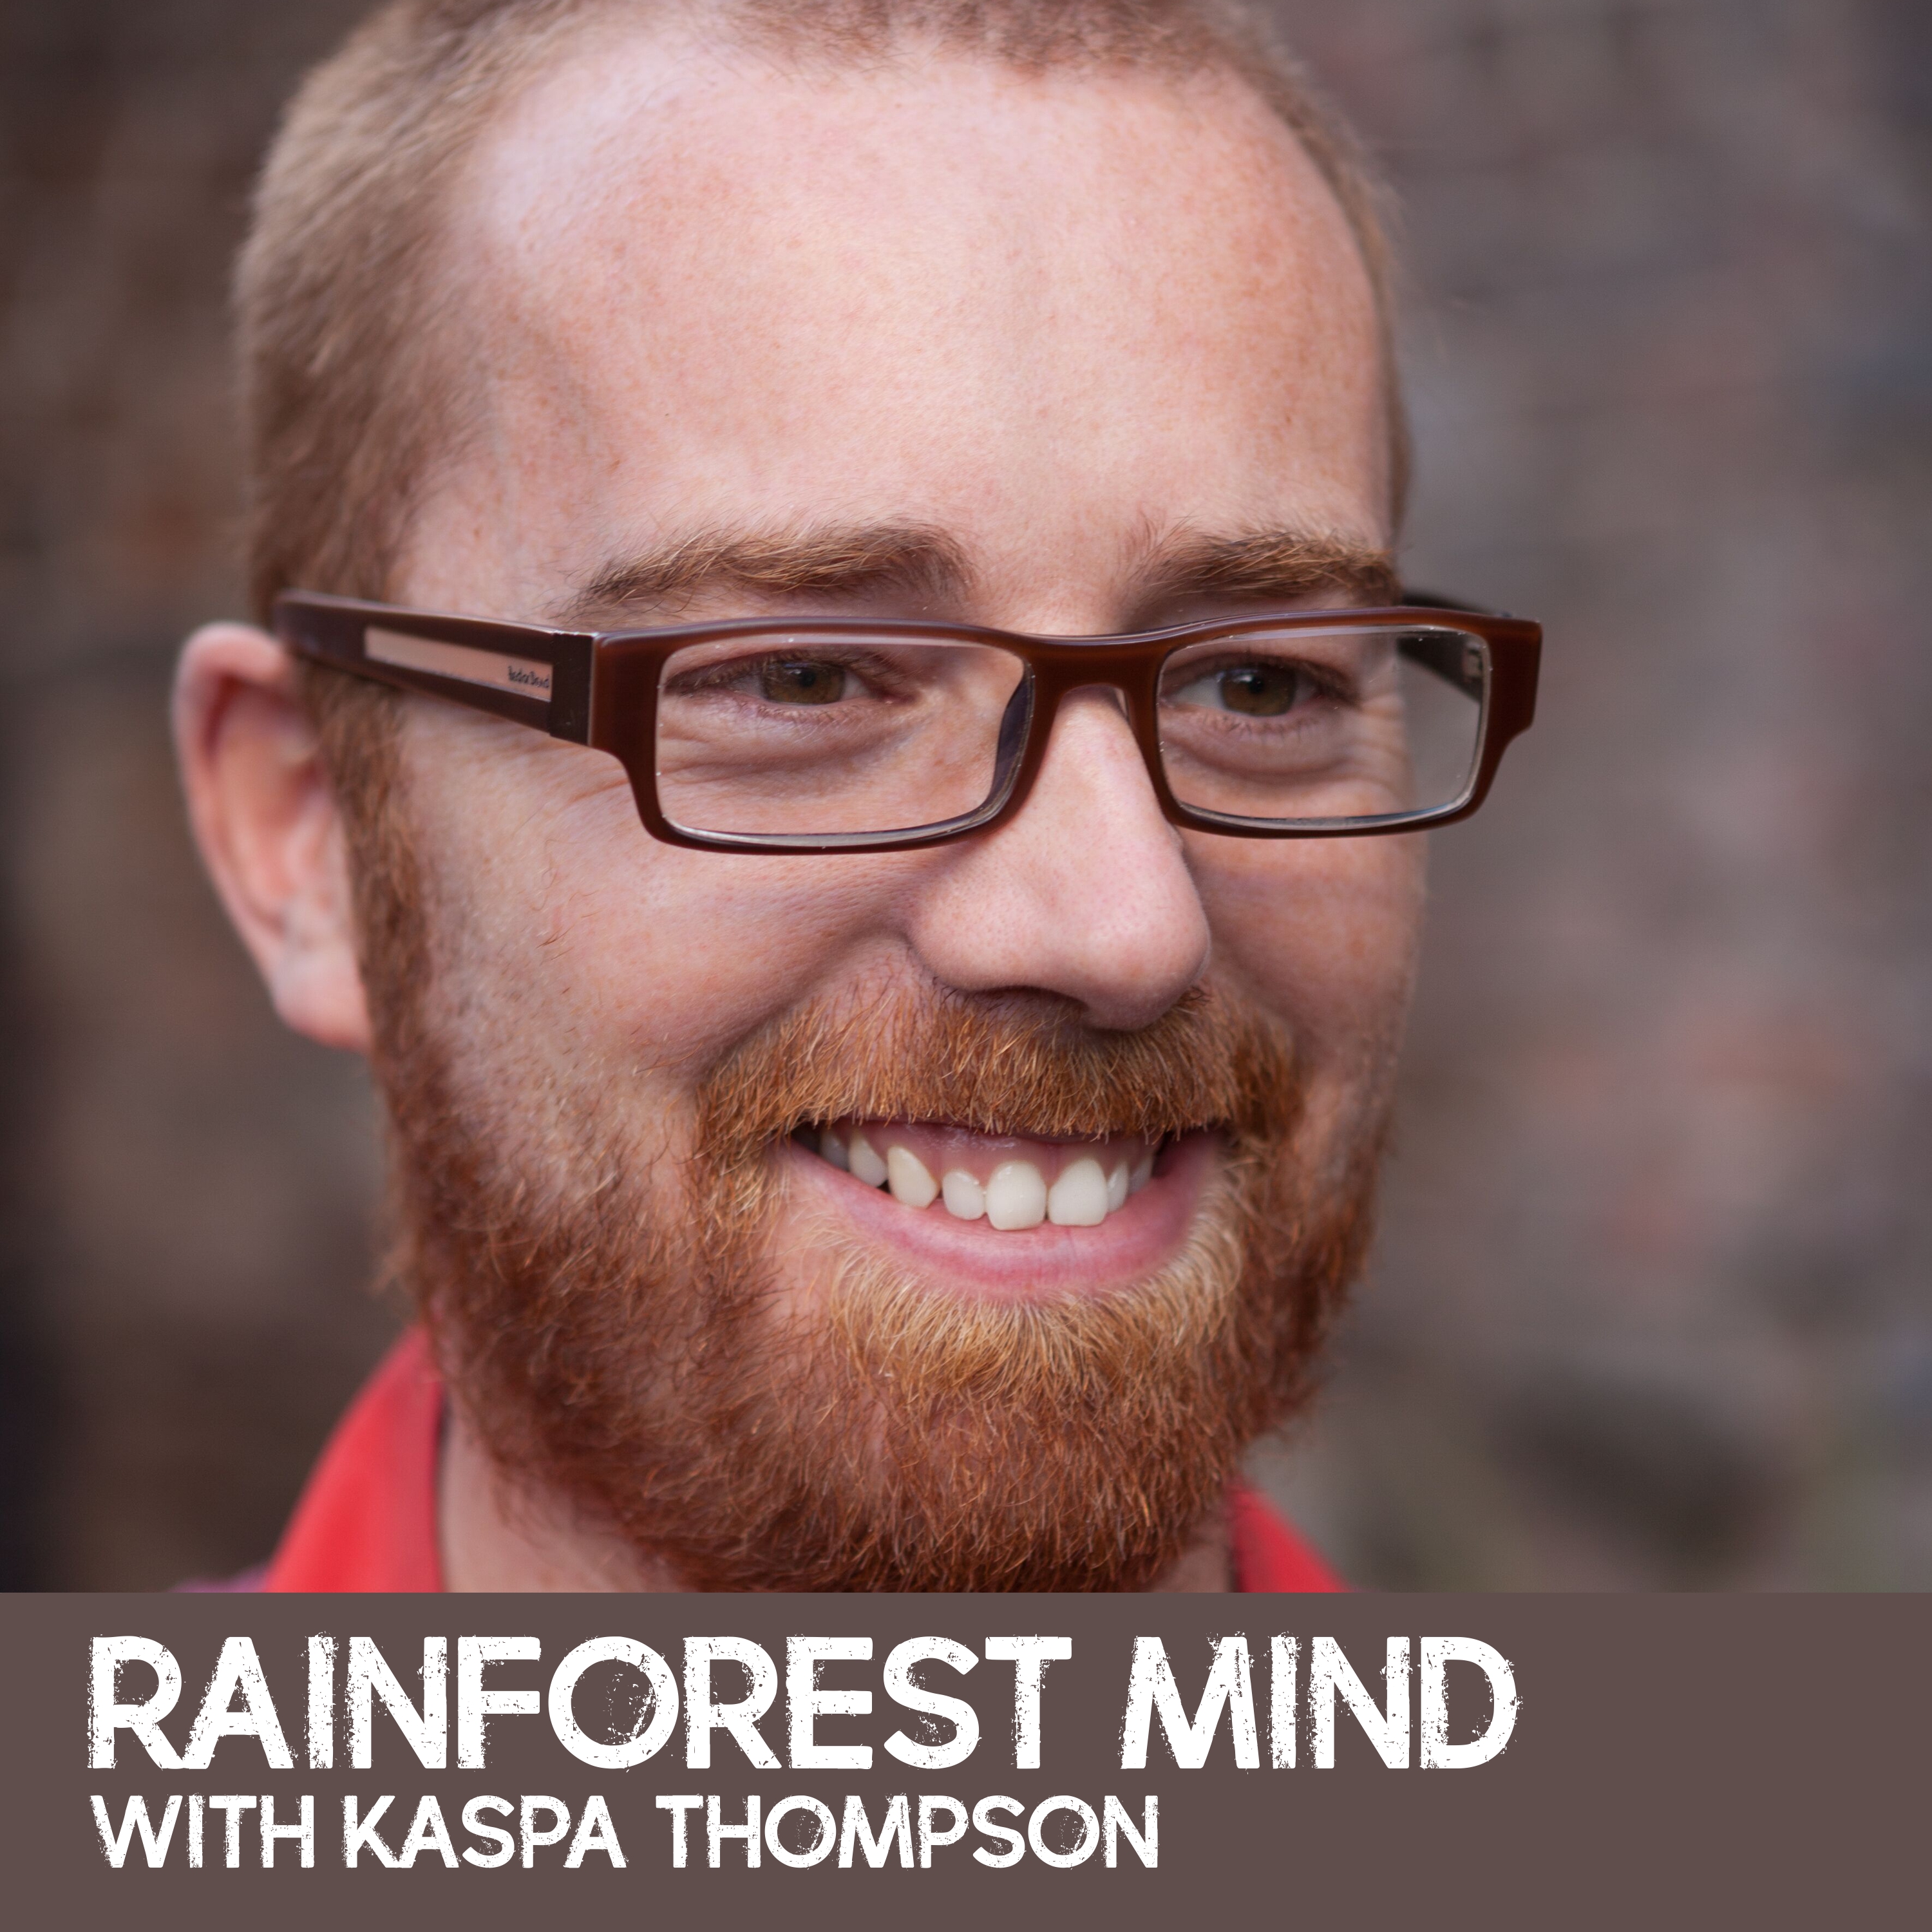 Rainforest Mind: Lessons from my puppy